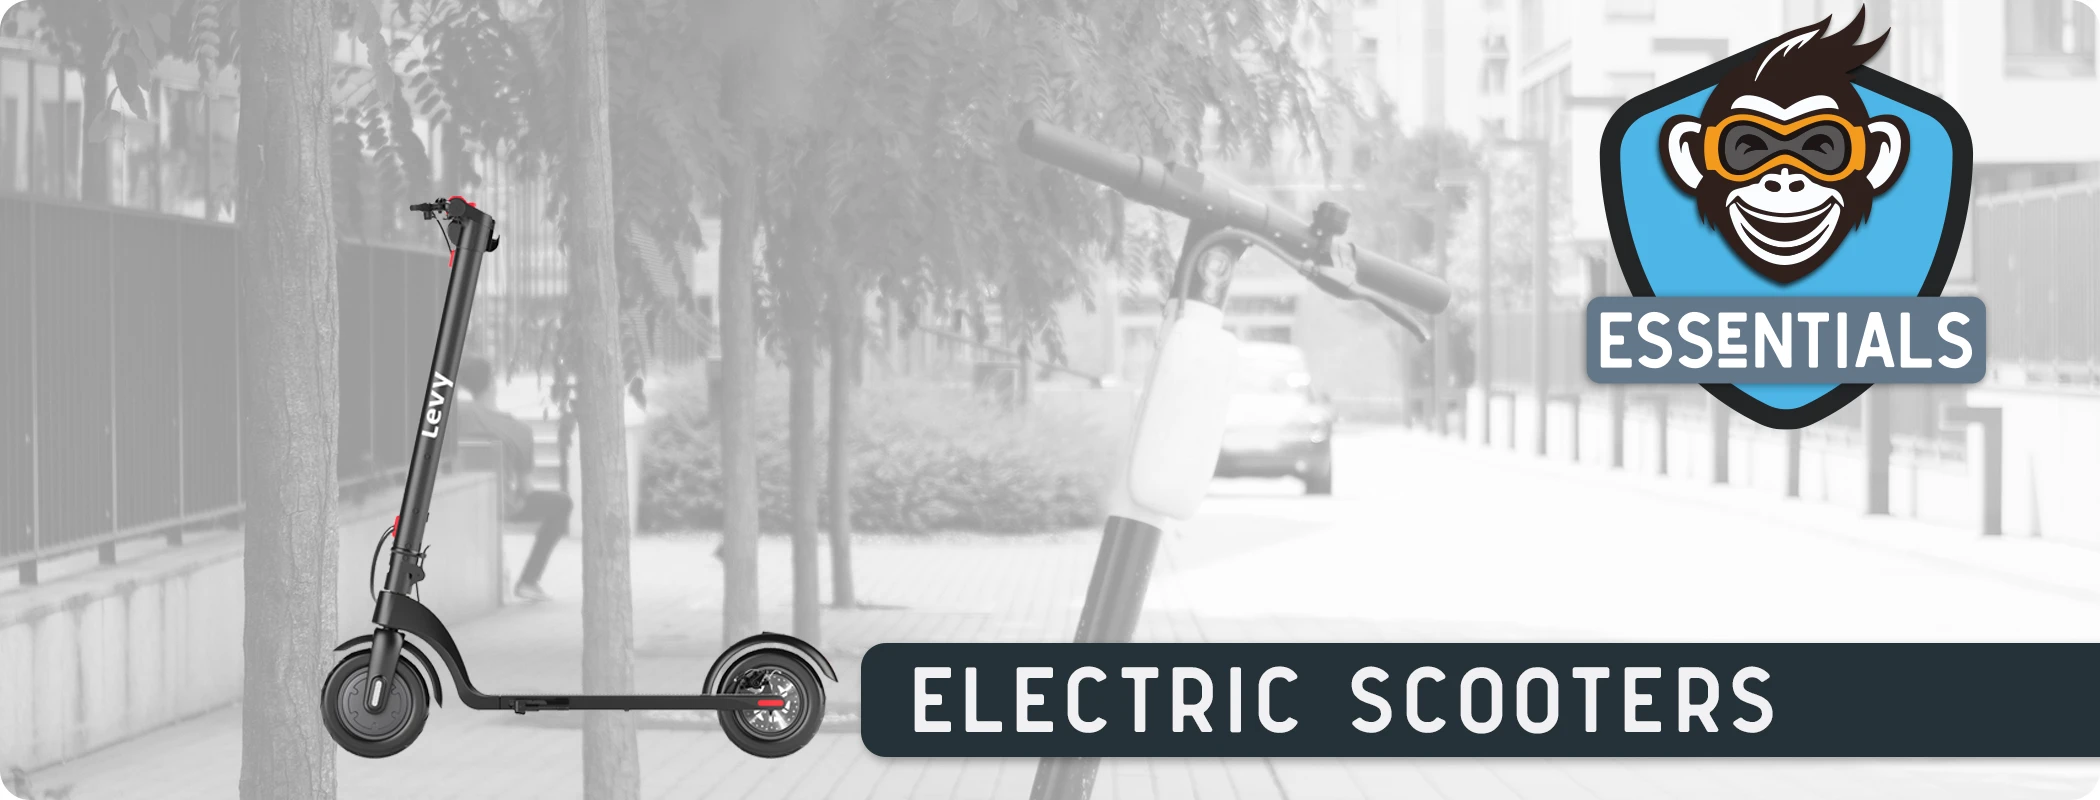 Essentials Electric Scooters